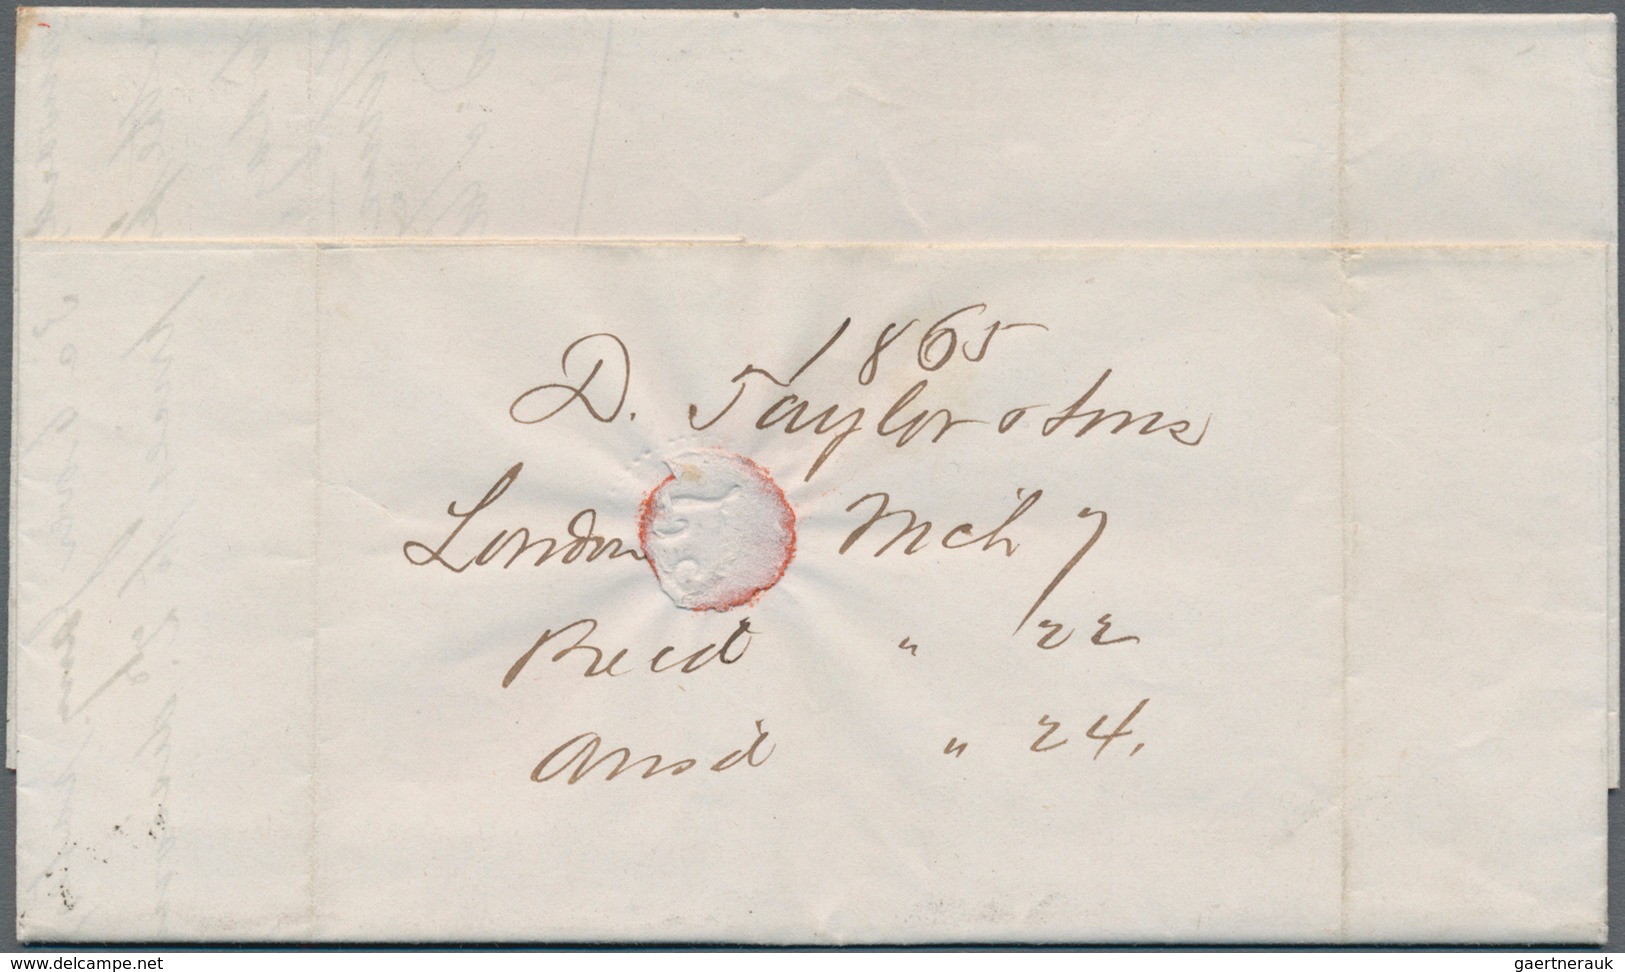 Großbritannien - Stempel: 1865, Two Folded Letters Each With Forwarder Mark "DAVID TAYLOR & SONS; LO - Postmark Collection